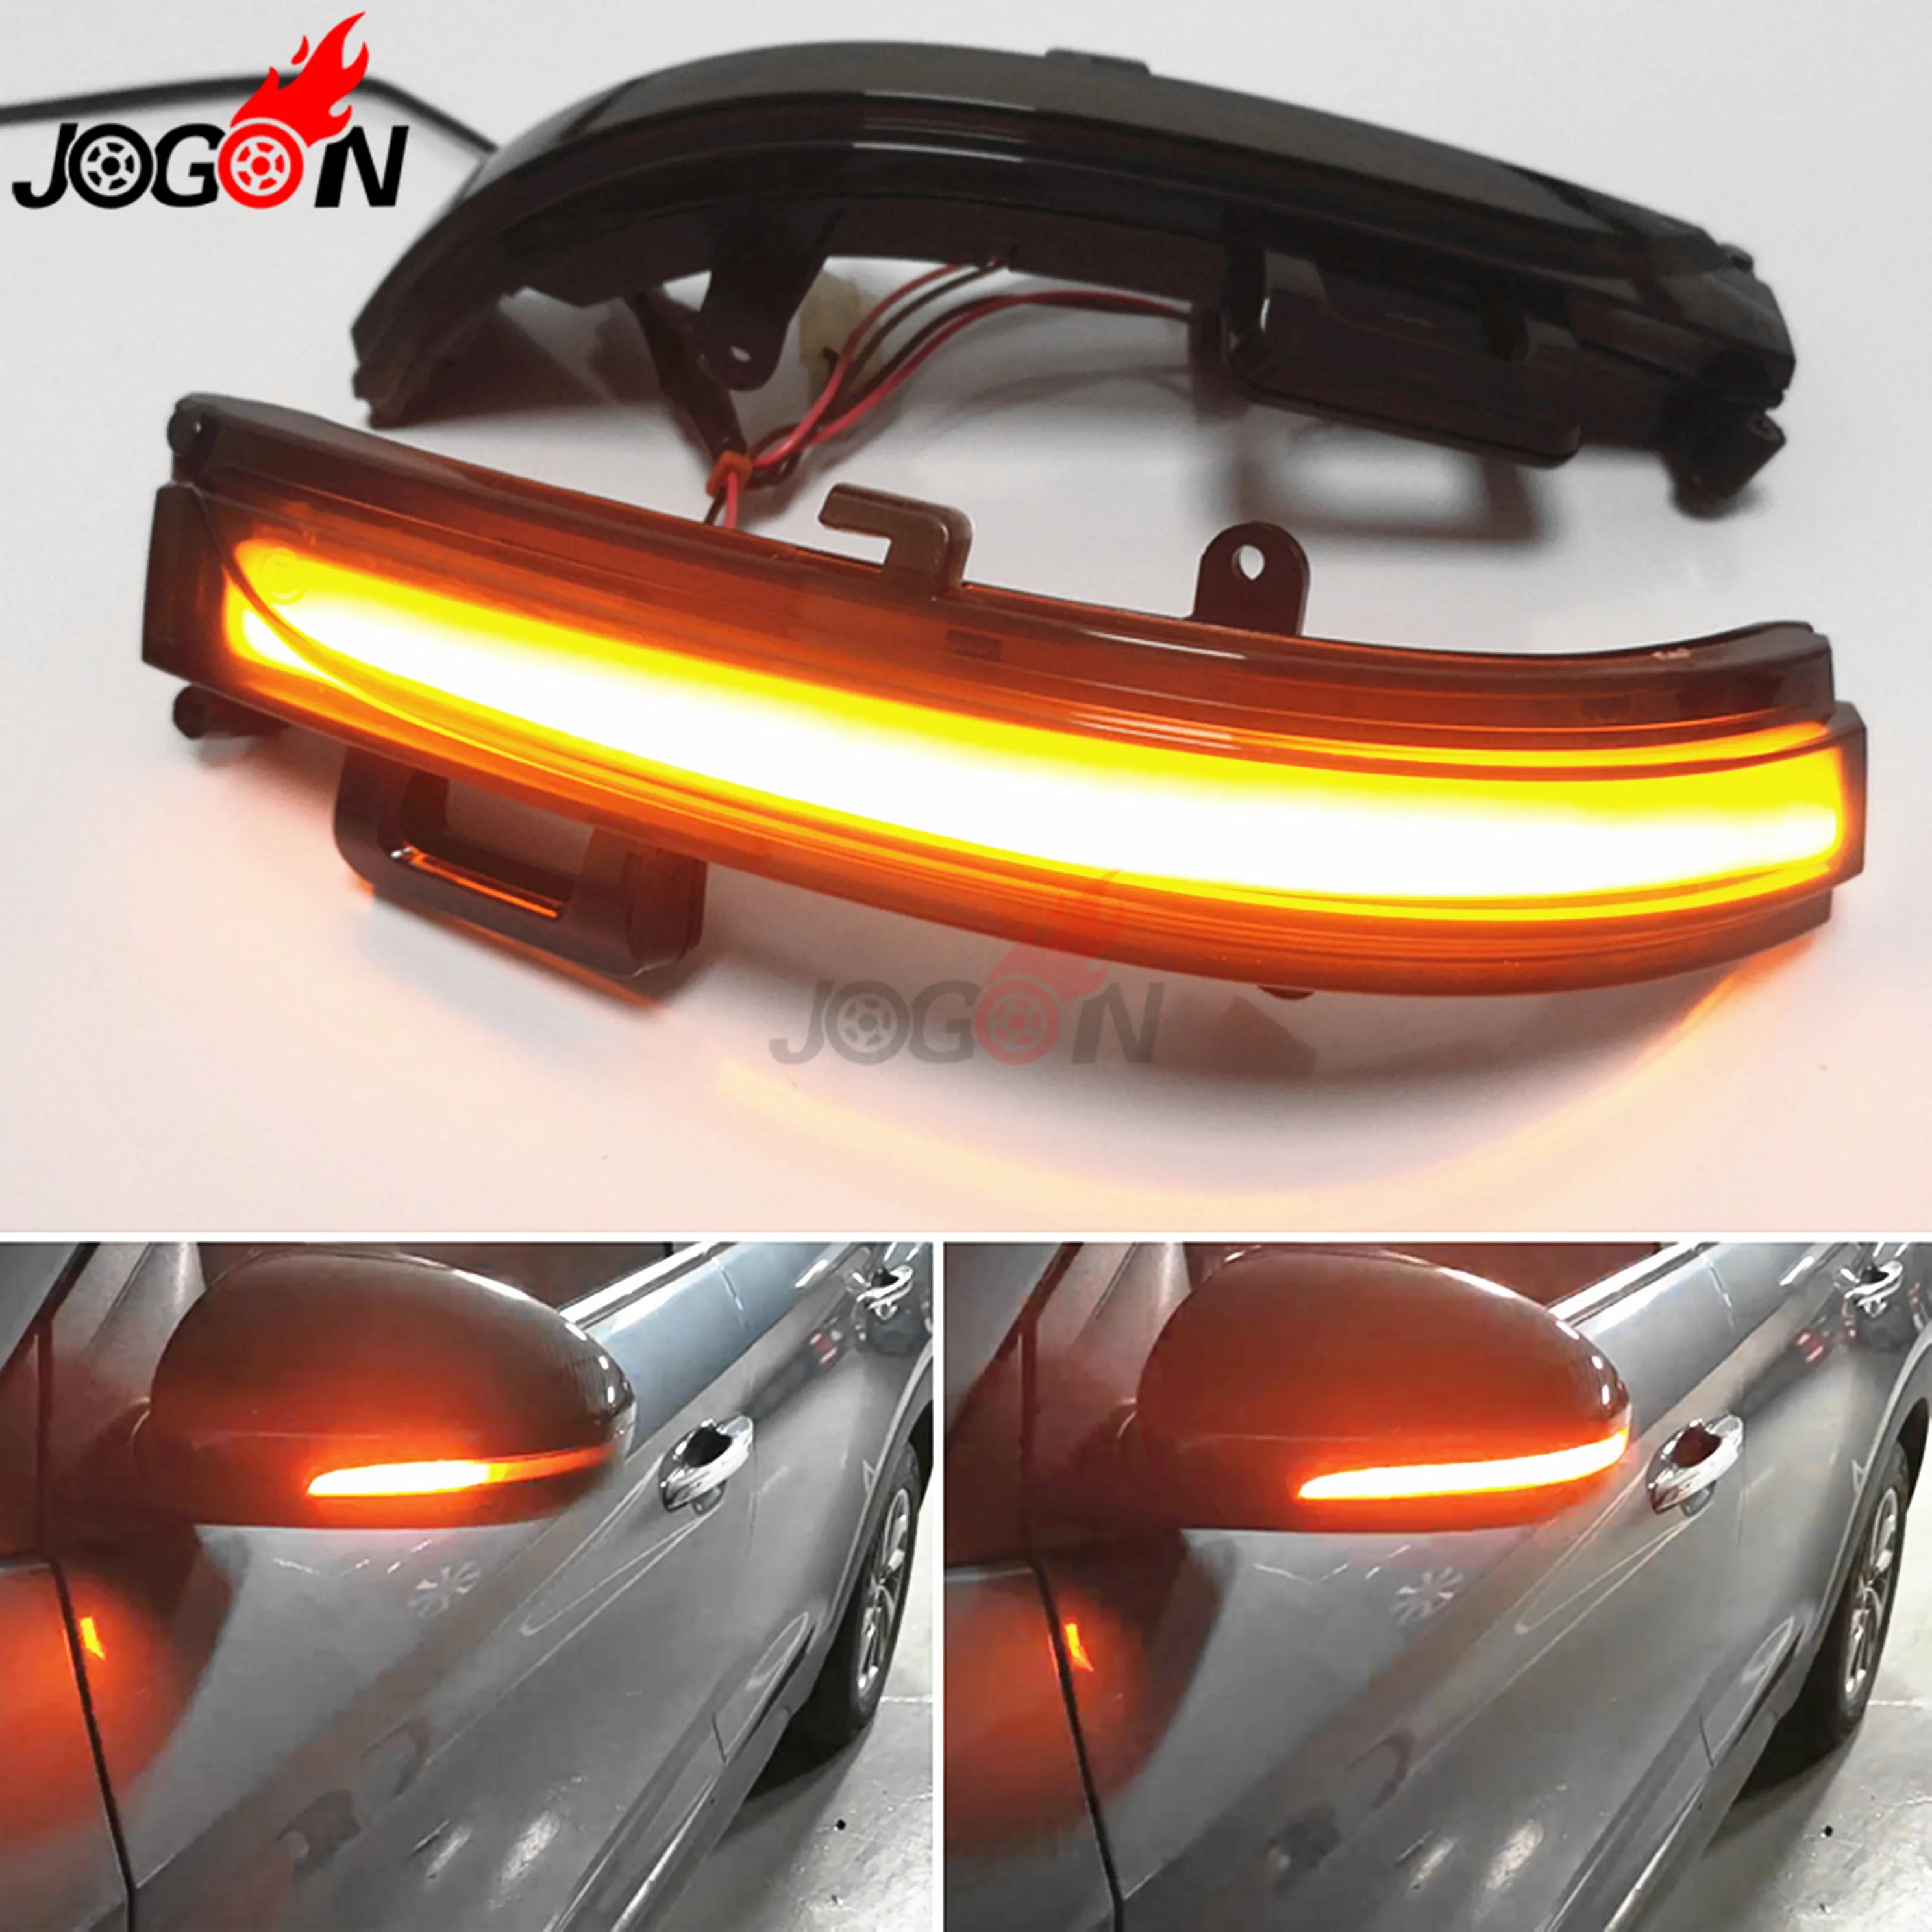 

LED Dynamic Turn Signal Light Sequential Blinker Side Rearview Mirror Indicator For Hyundai Tucson TL 2016 2017 2018 2019